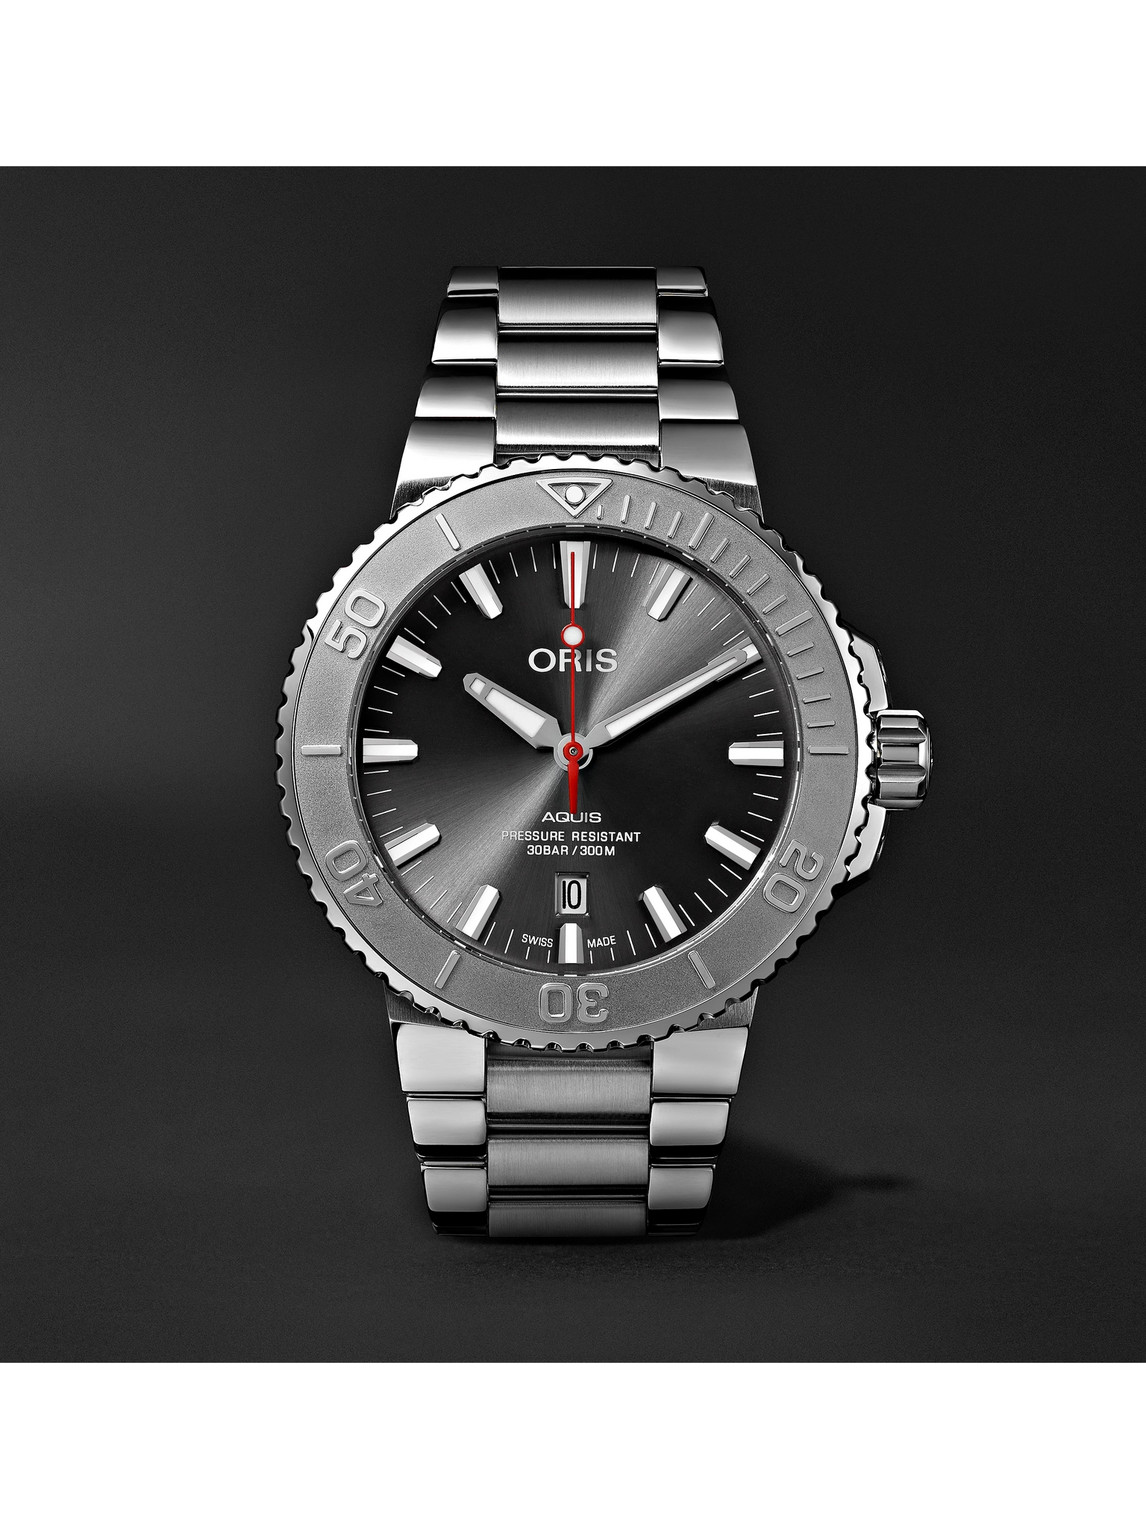 Oris Aquis Date Relief Automatic 43.5mm Stainless Steel Watch, Ref. No. 01 733 7730 4153-07 8 24 05peb In Gray